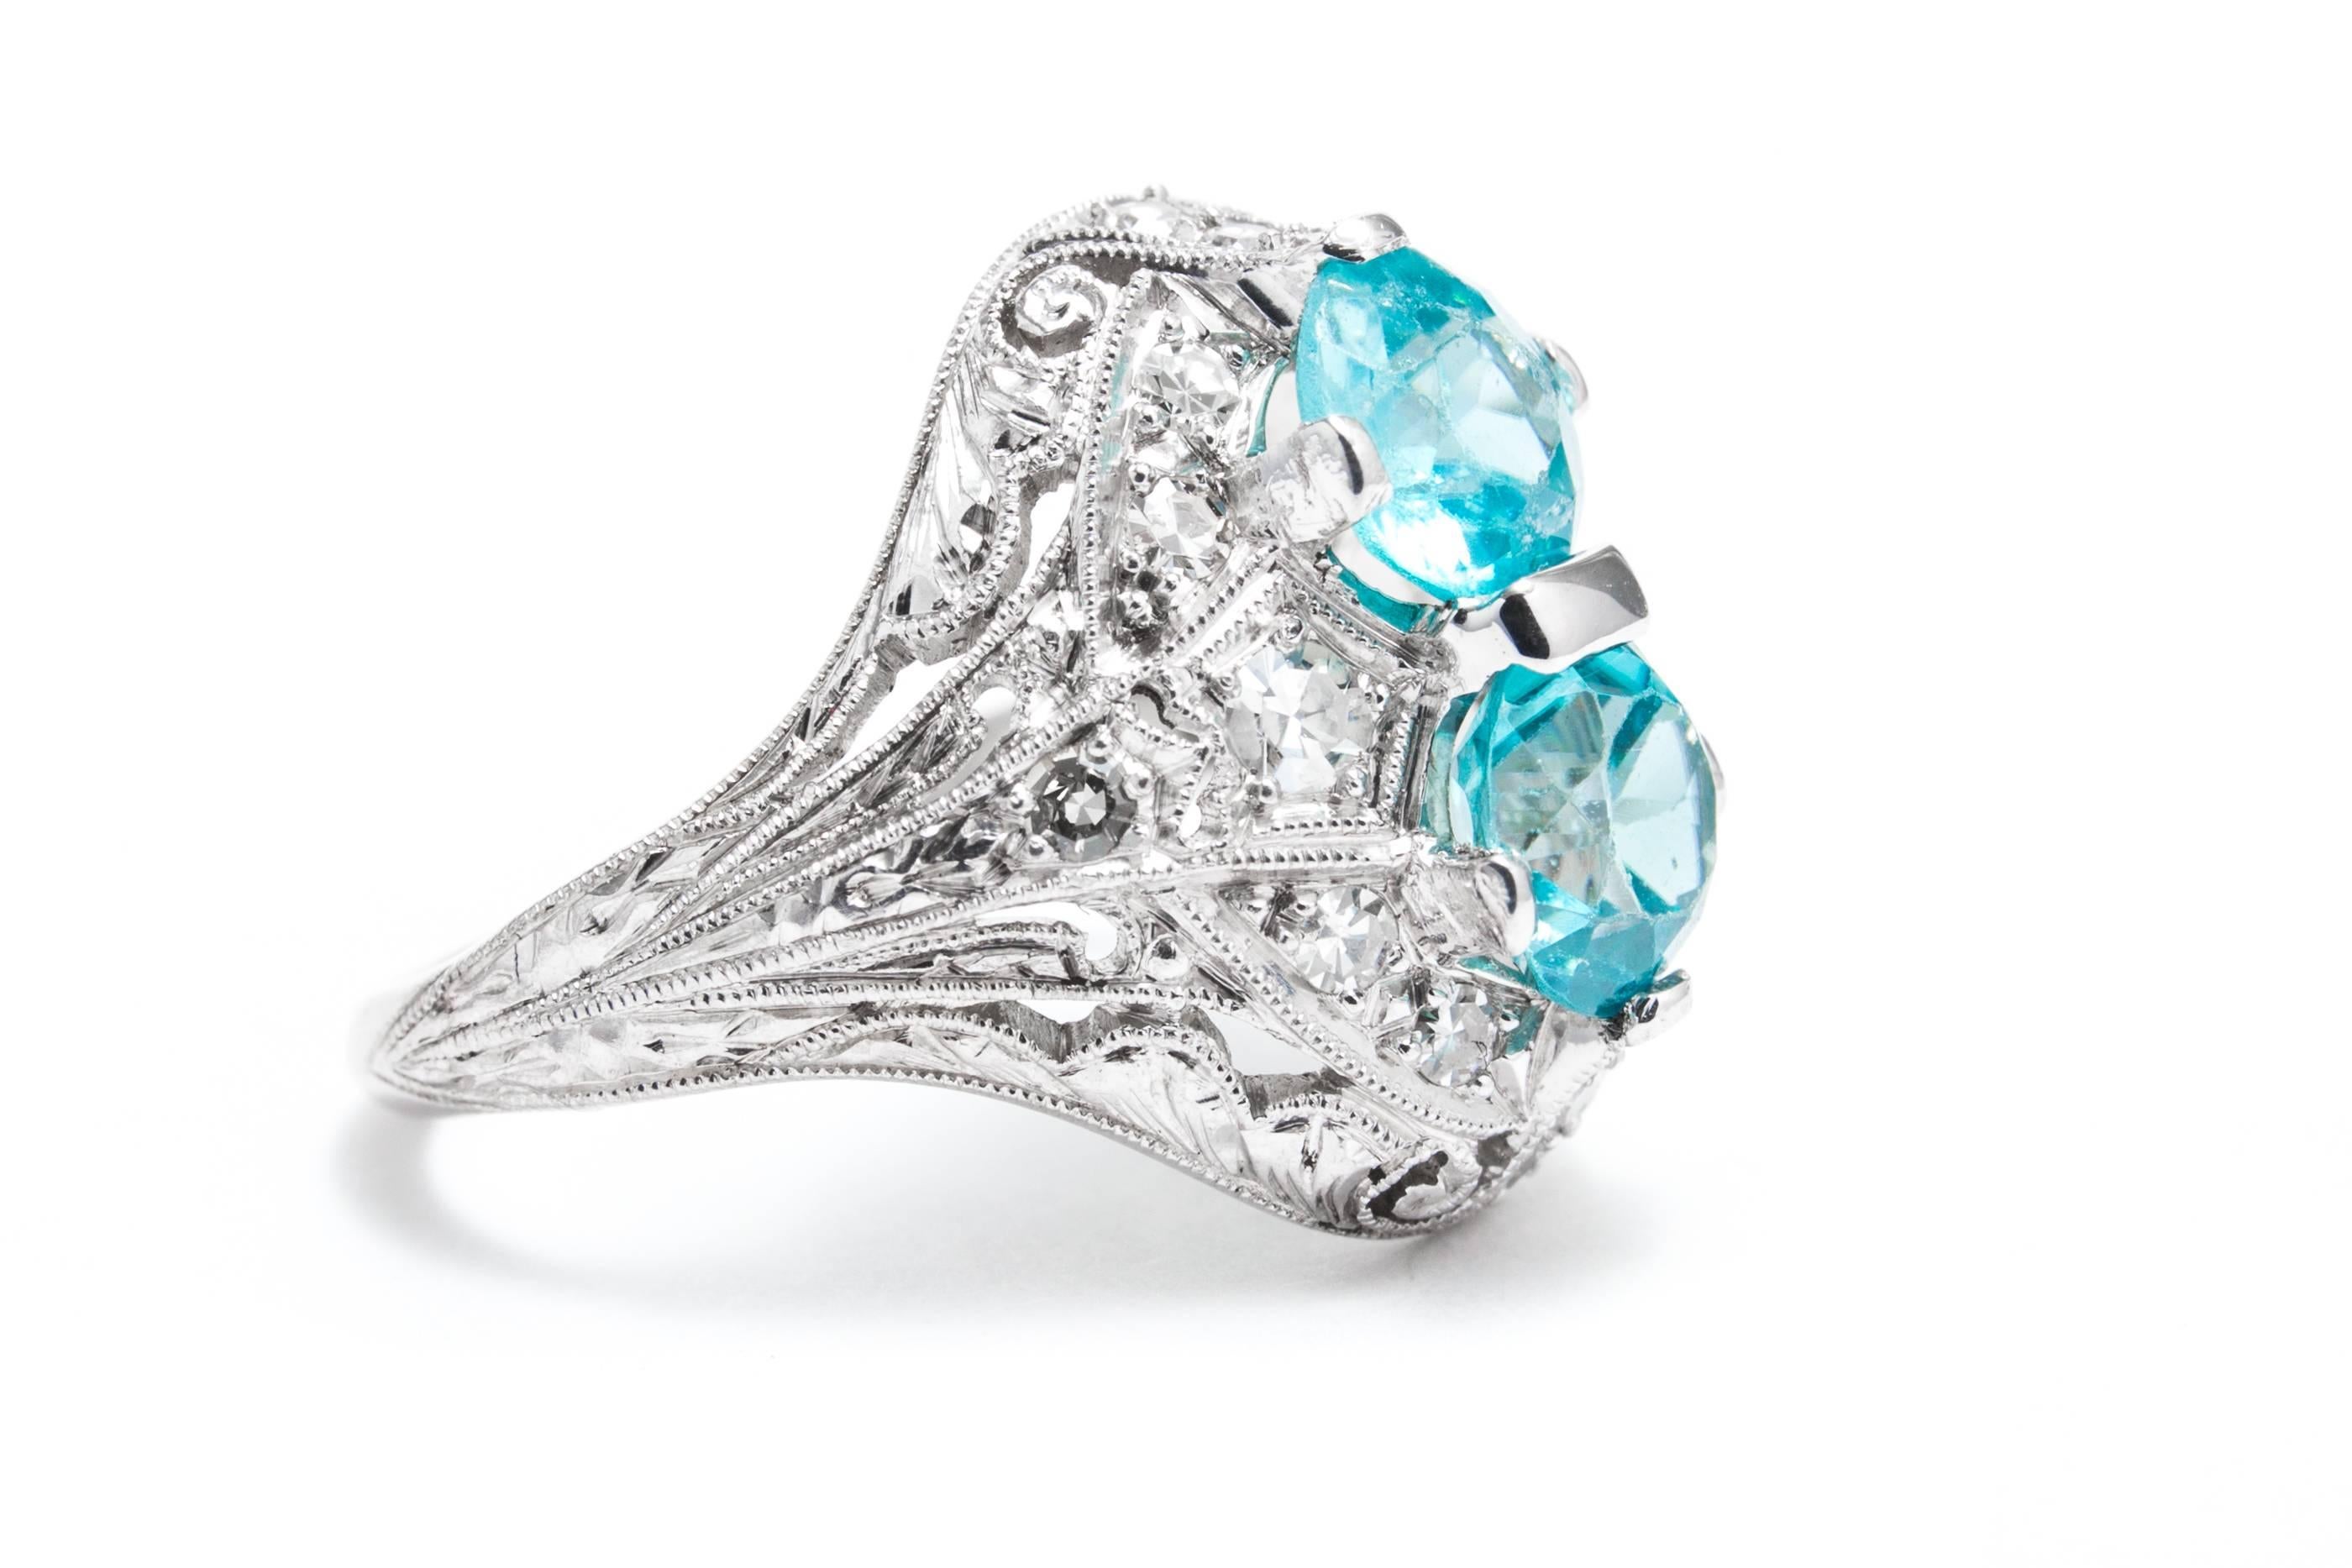 A beautiful original art deco period blue zircon and diamond ring in luxurious platinum.  Centered by a pair of antique European cut blue zircons, this ring features pave set diamonds throughout along with the most beautiful hand engraving